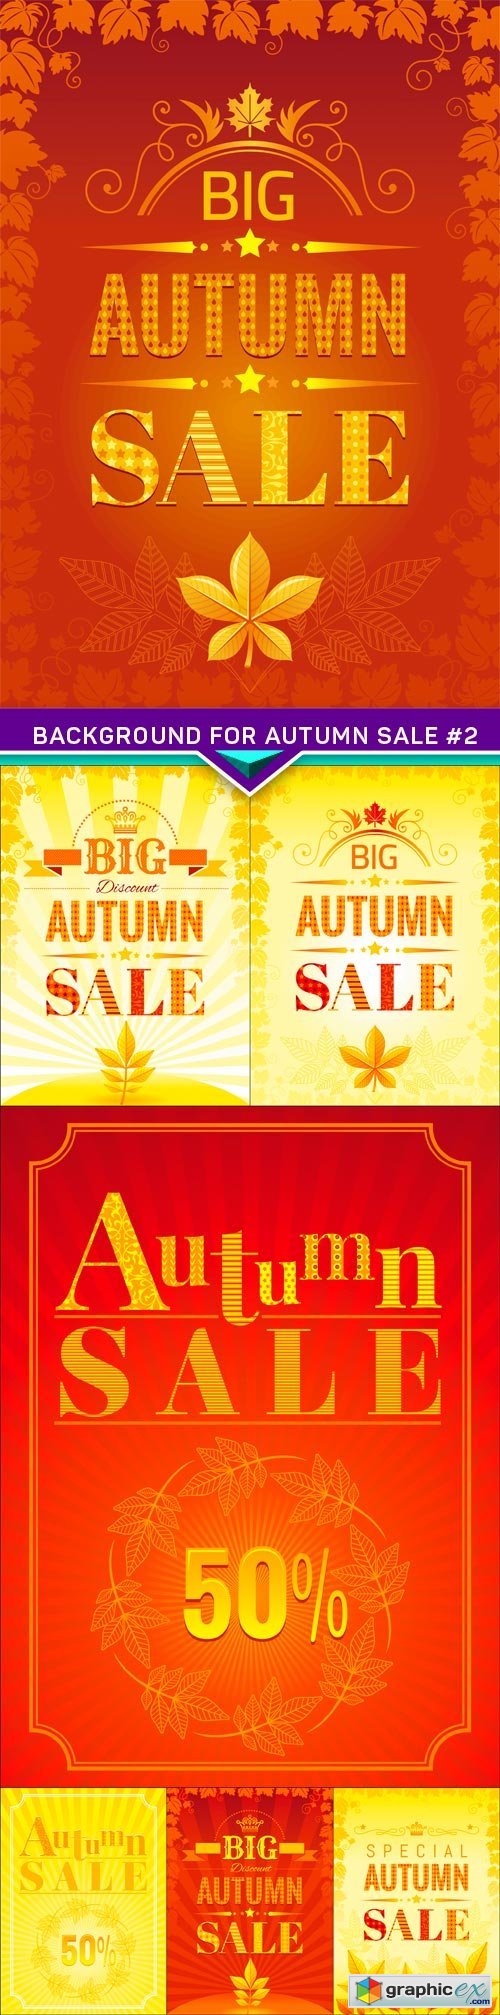 Background for autumn sale #2 7X EPS